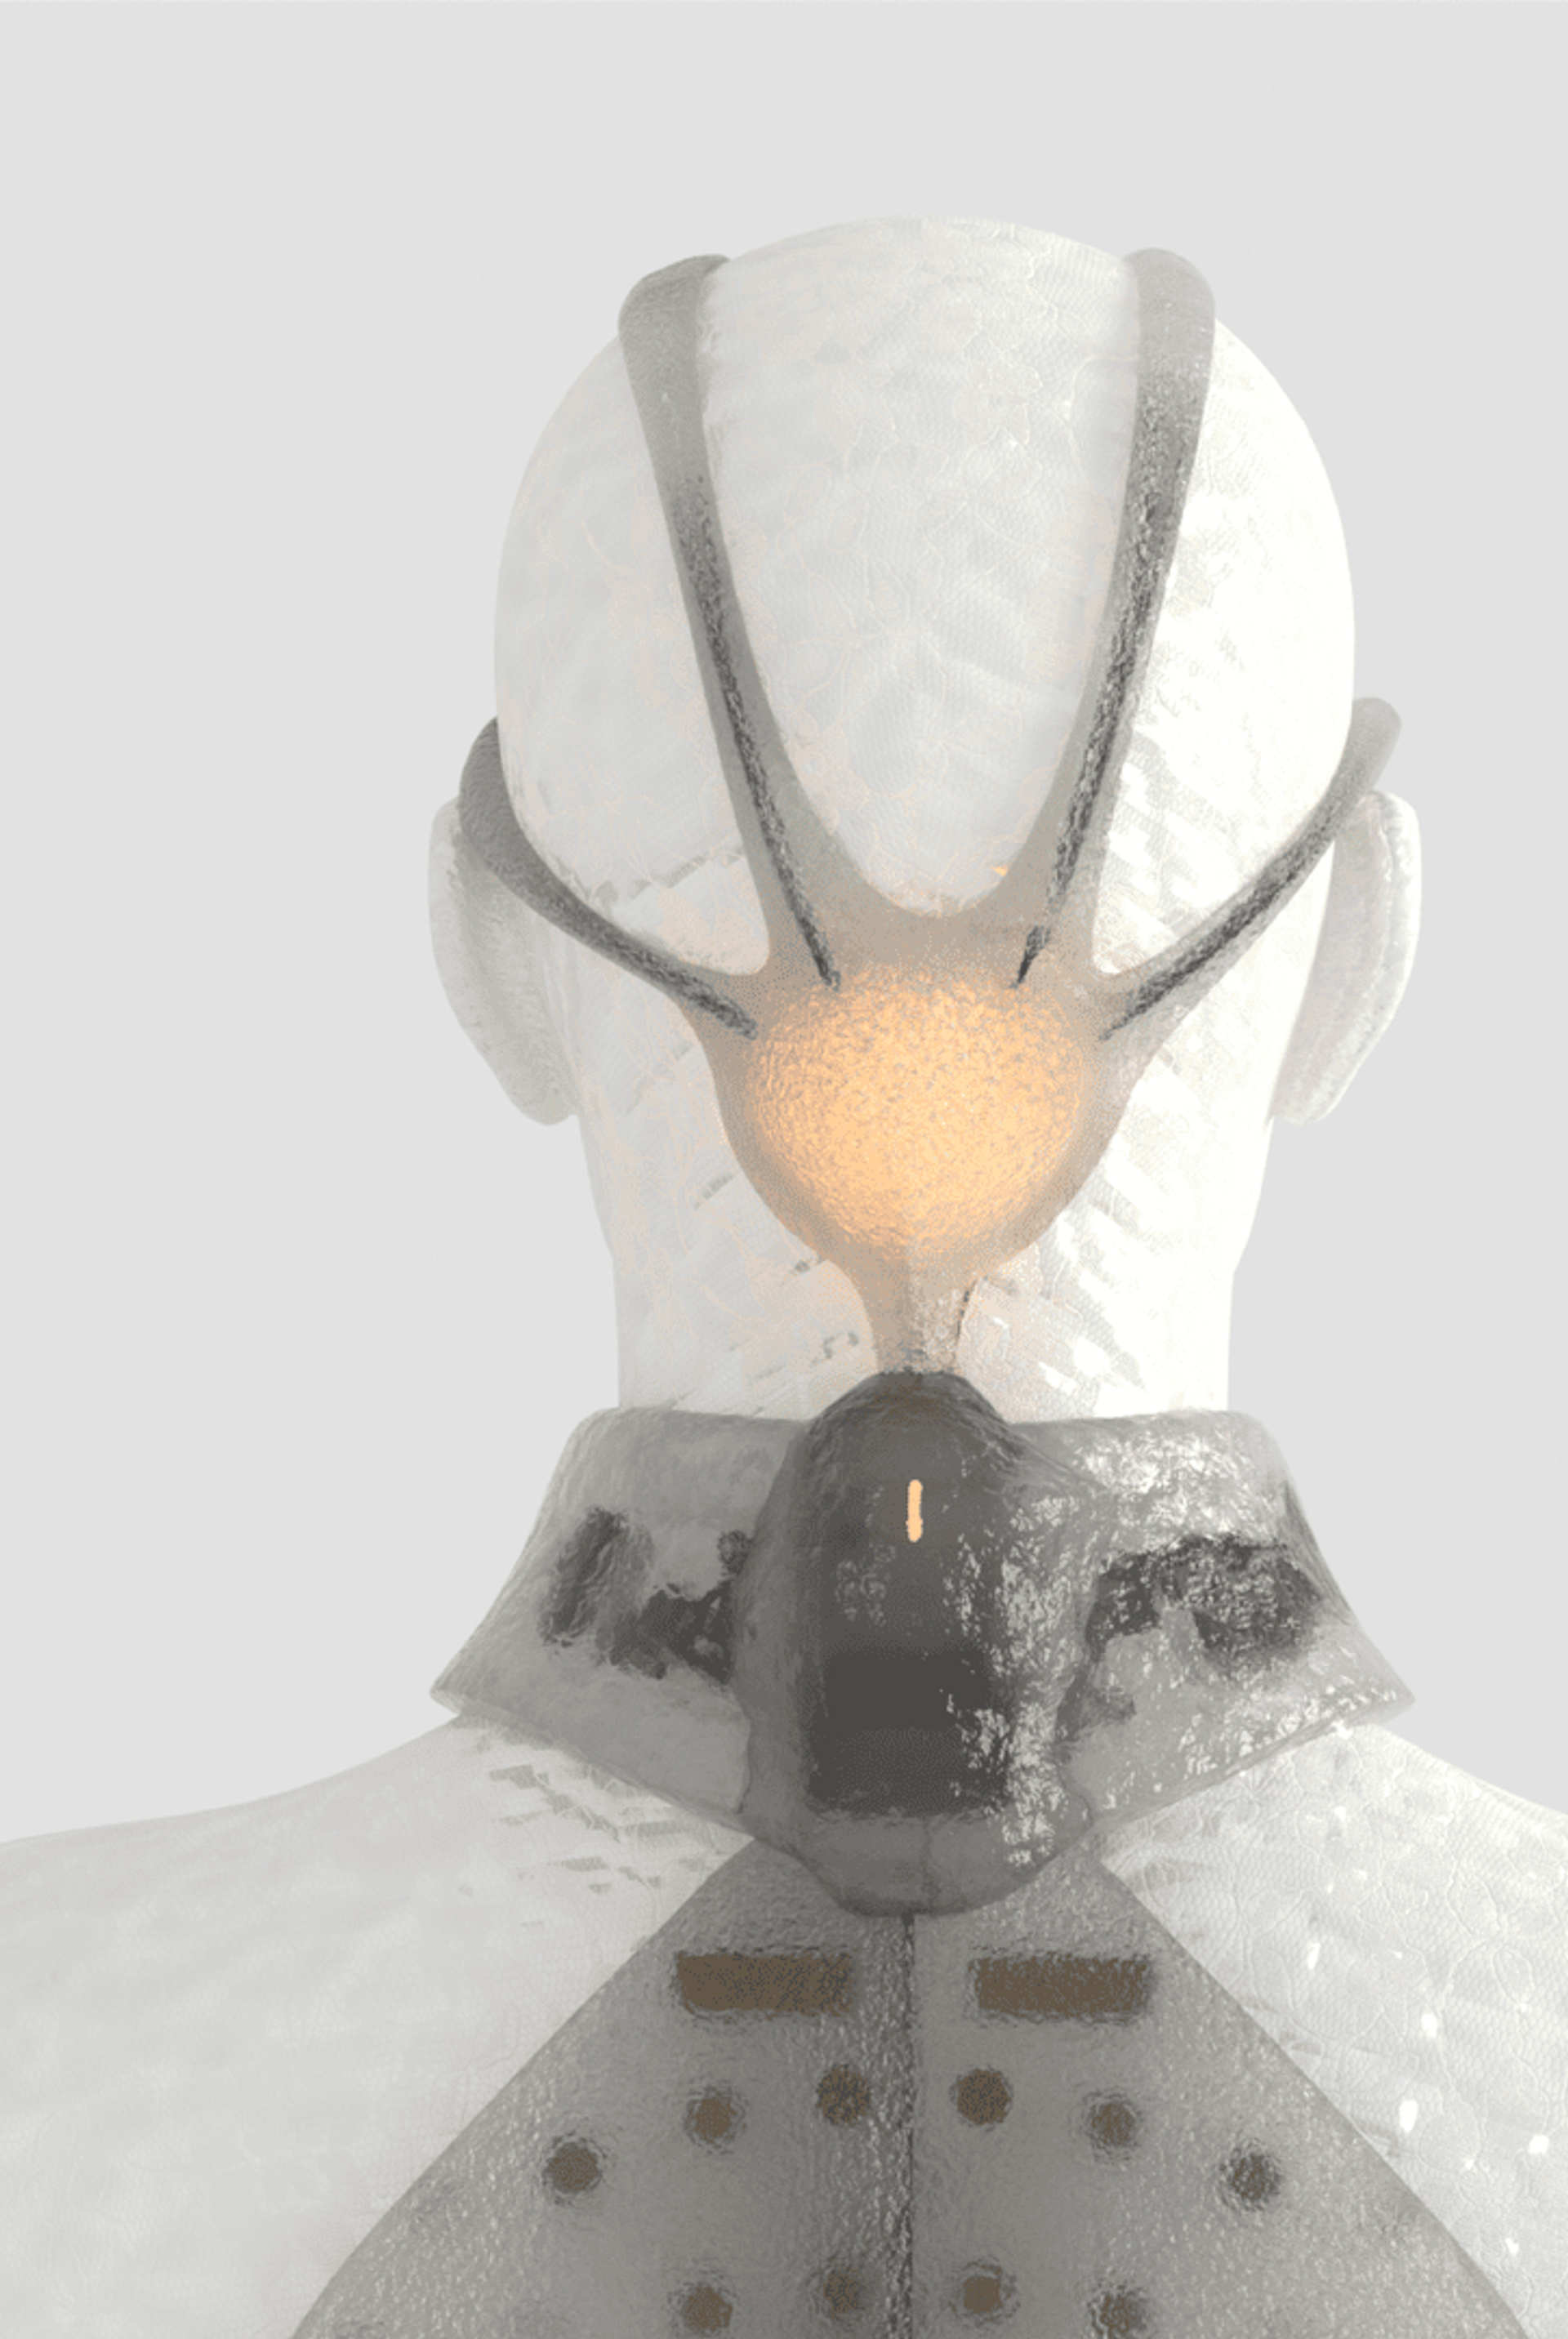 Image of the back of a completely white human figure, from the shoulders up, wearing a frosted transparent headpiece, with an illuminated section, attached to a neck collar. By Yutong Fu